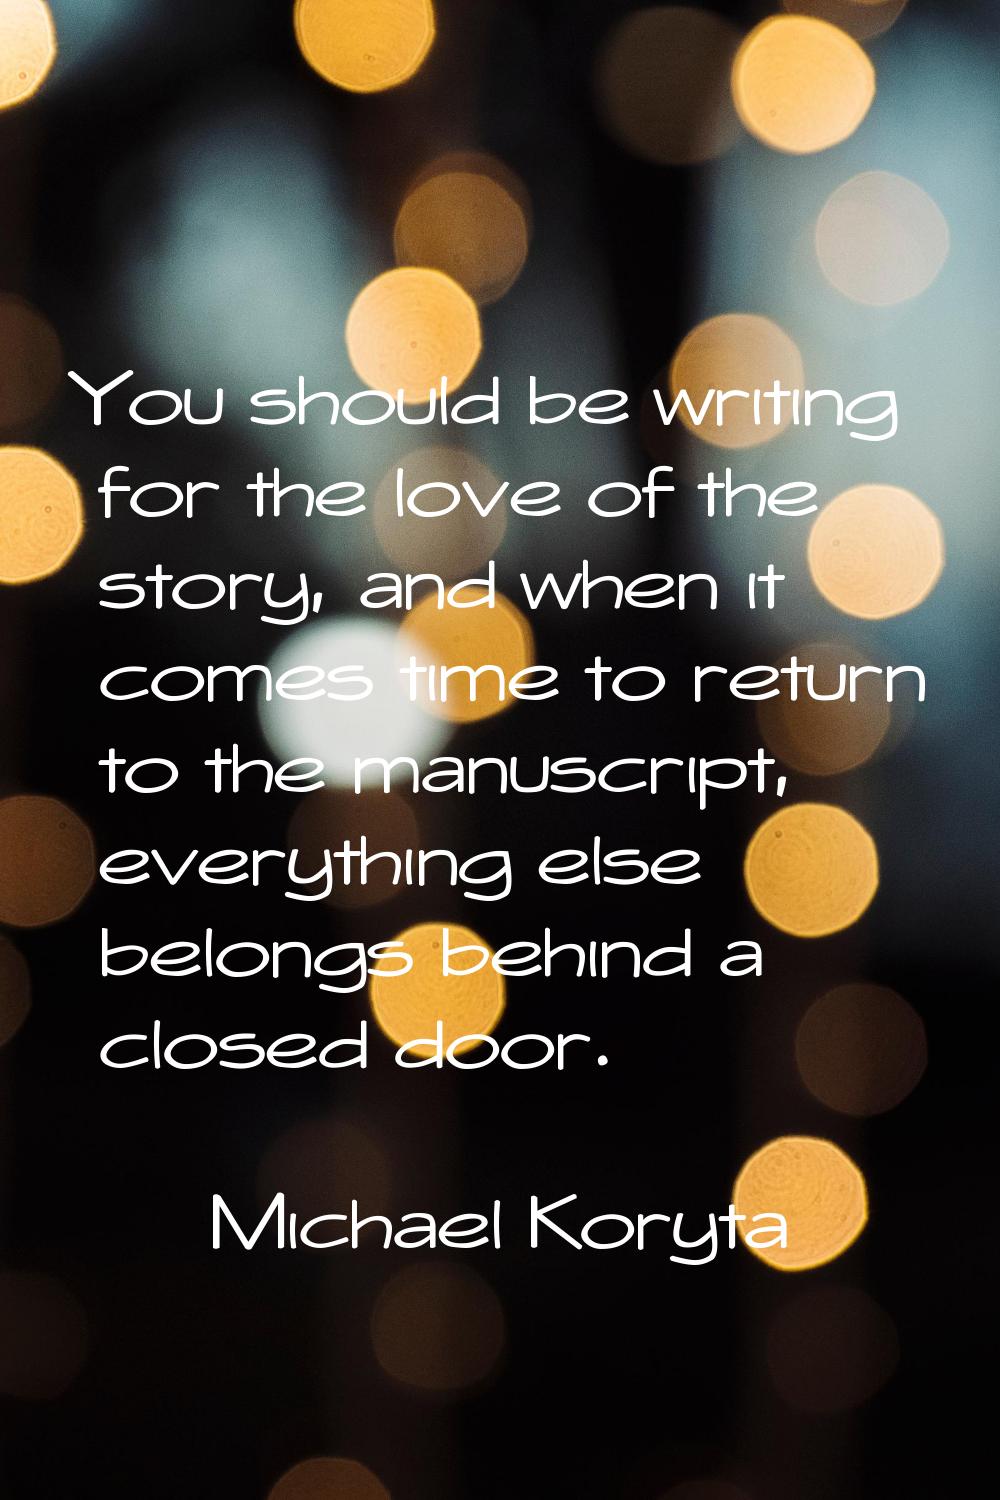 You should be writing for the love of the story, and when it comes time to return to the manuscript